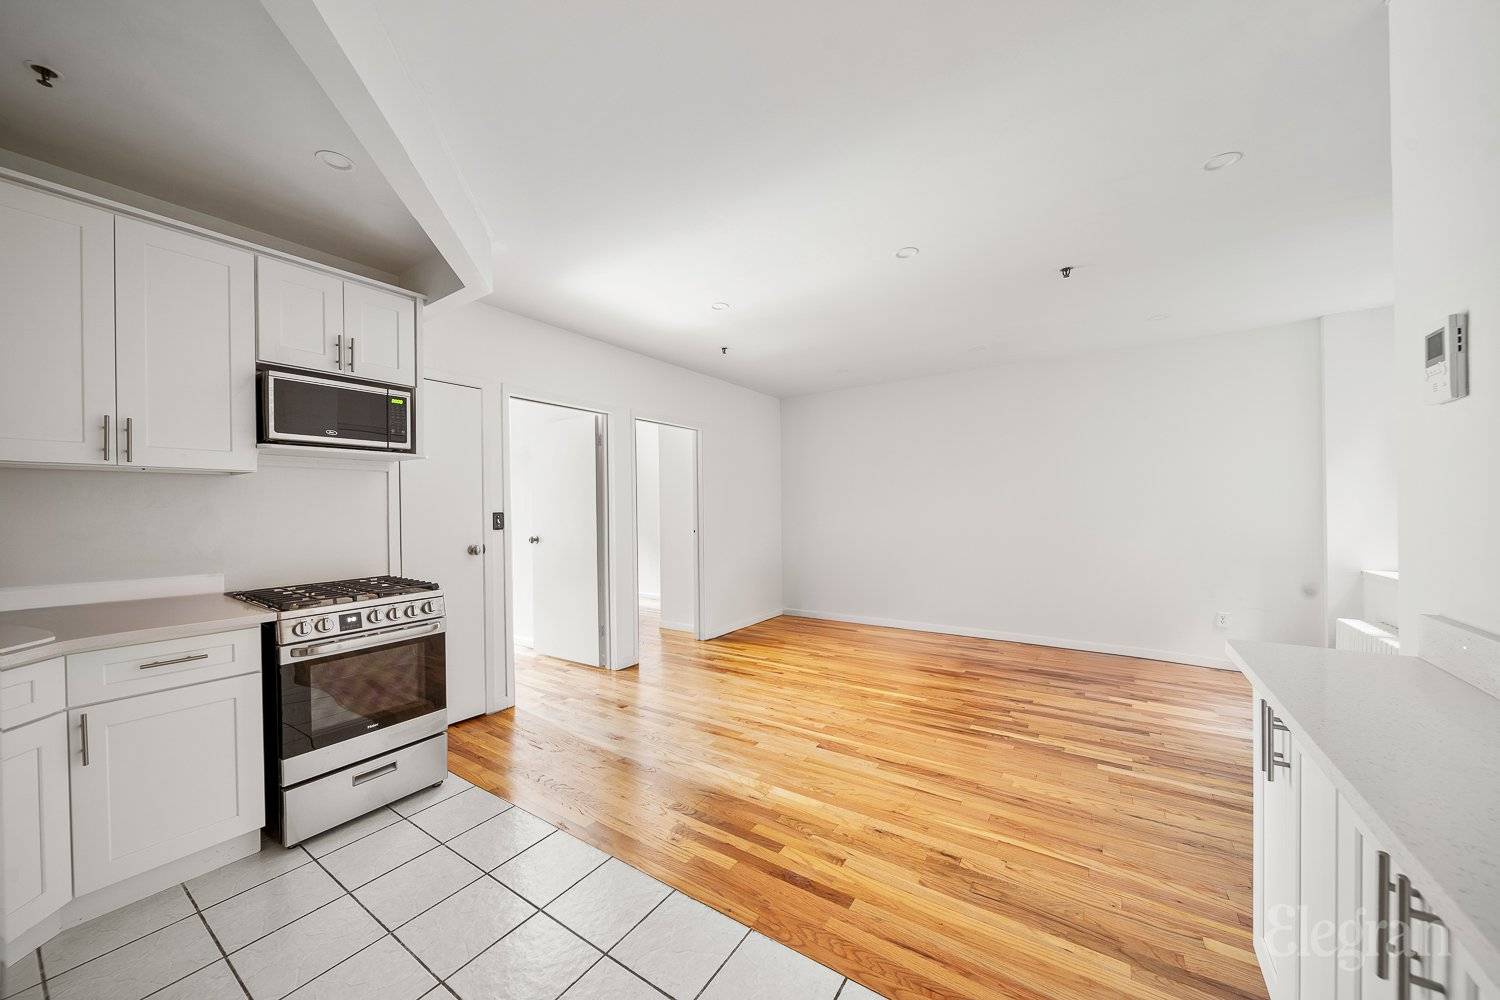 Check out this spacious 2 bedroom, 1 bath apartment, just steps away from the 6 subway train.